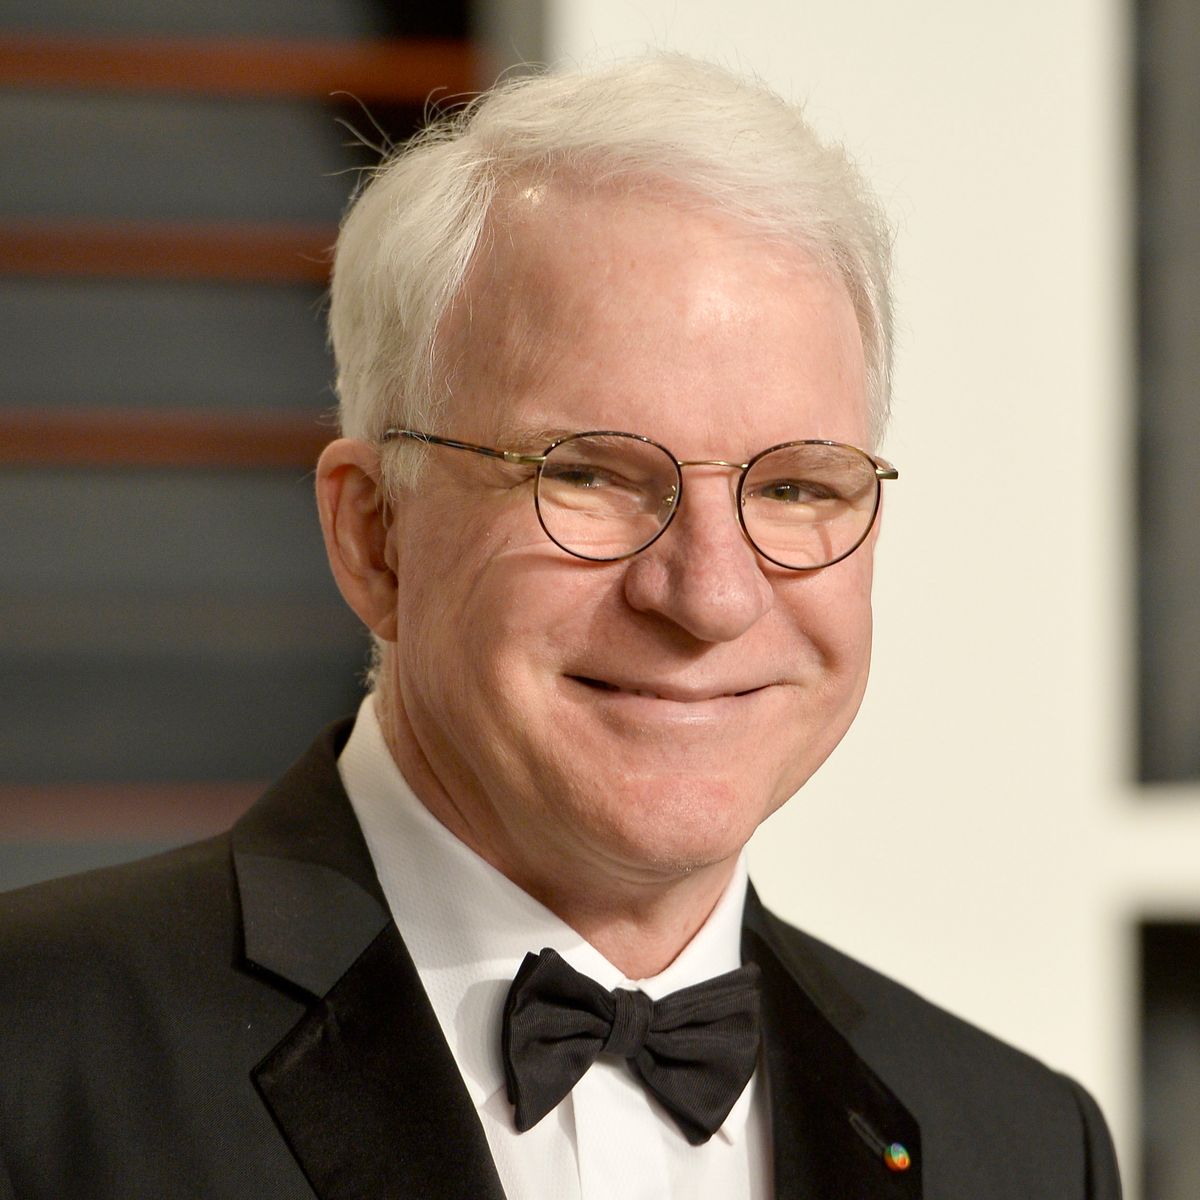 2015 Vanity Fair Oscar Party Hosted By Graydon Carter - ArrivalsBEVERLY HILLS, CA - FEBRUARY 22: Actor Steve Martin attends the 2015 Vanity Fair Oscar Party hosted by Graydon Carter at Wallis Annenberg Center for the Performing Arts on February 22, 2015 in Beverly Hills, California. (Photo by Pascal Le Segretain/Getty Images)